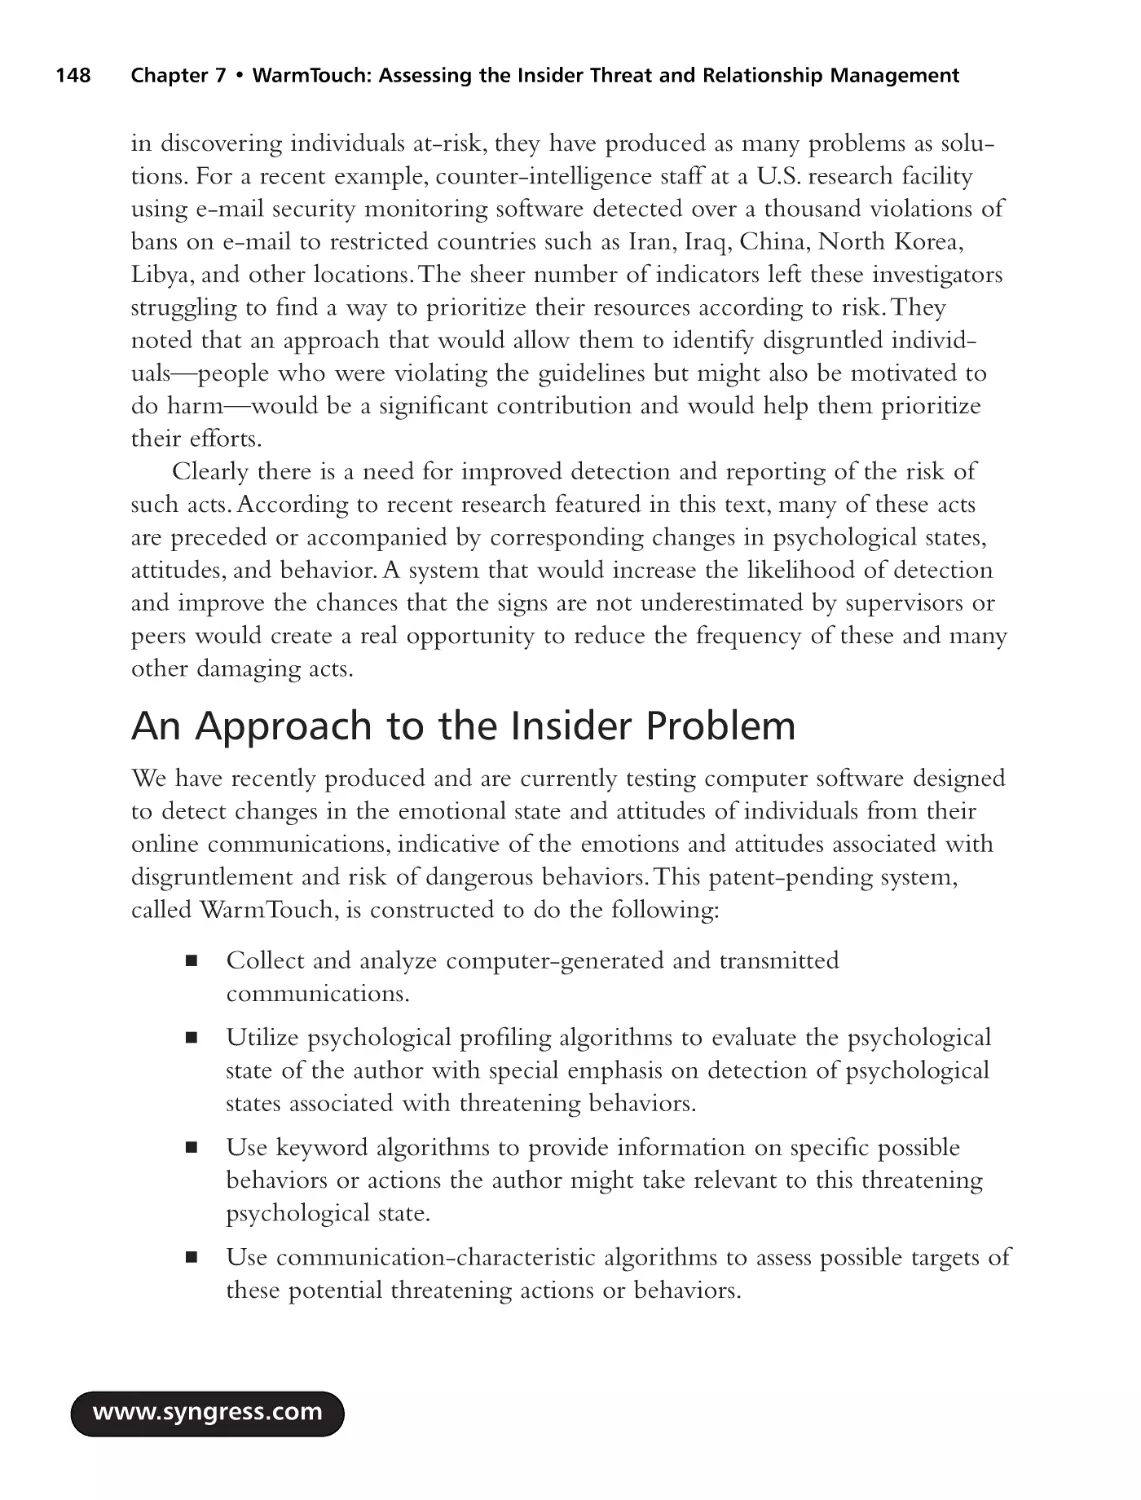 An Approach to the Insider Problem